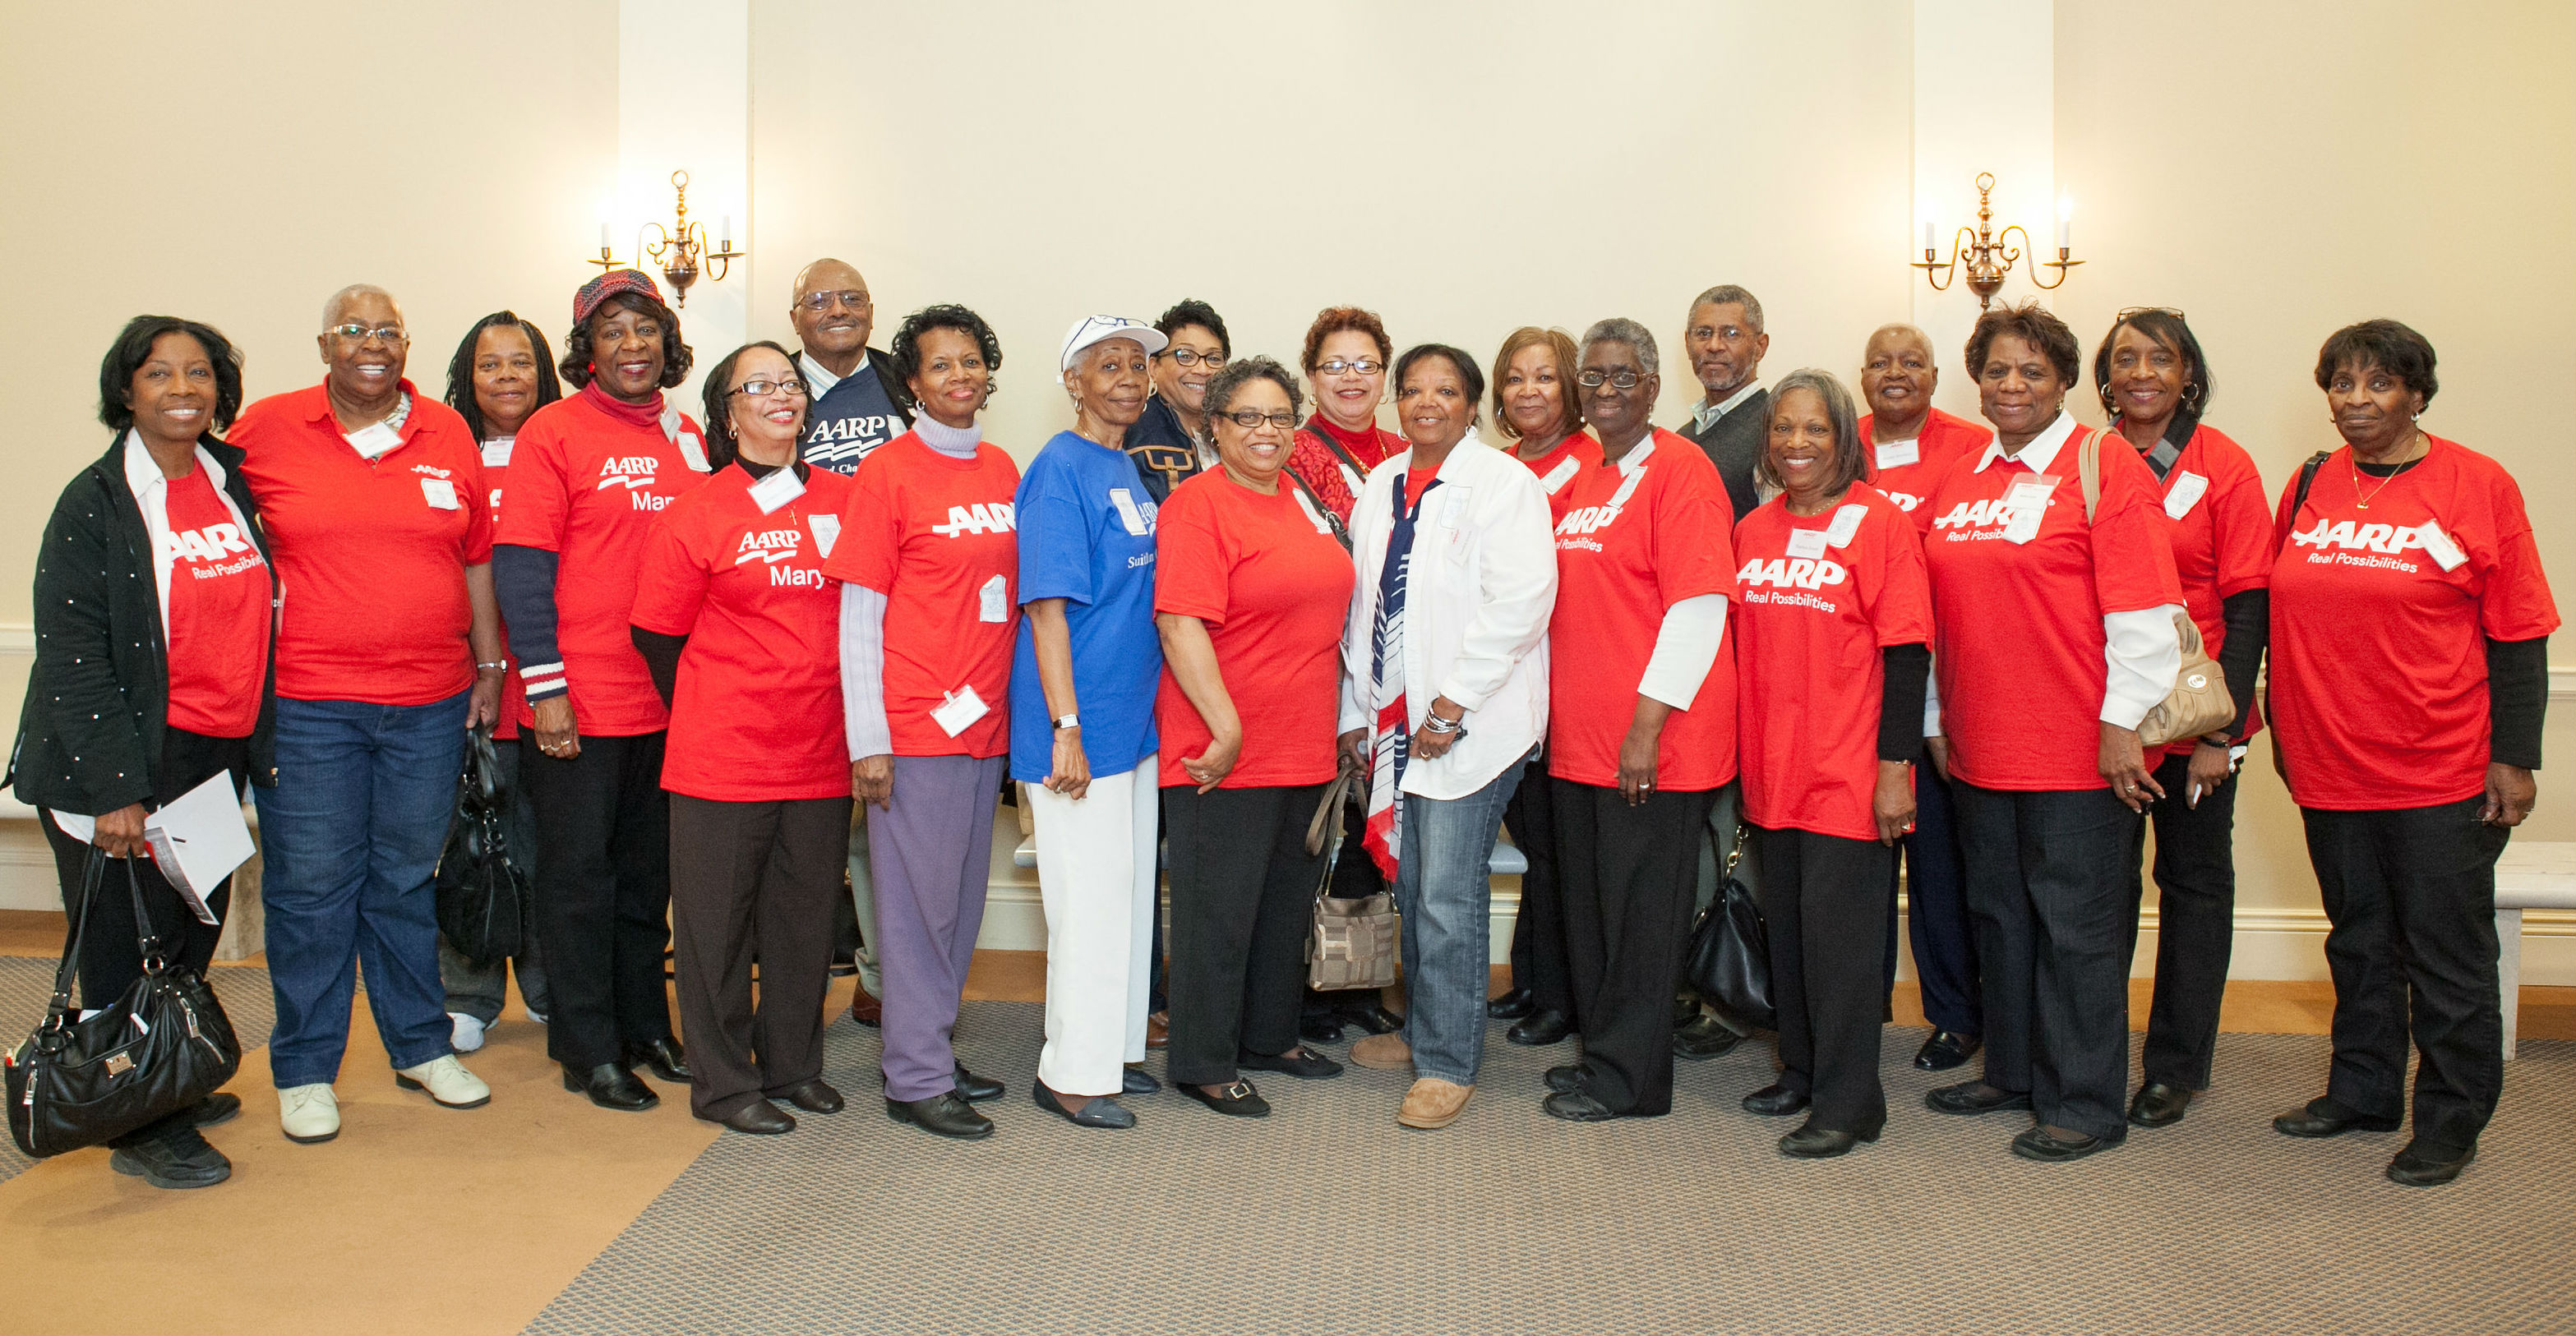 Attend AARP Maryland's Rally Day on March 18 in Annapolis.